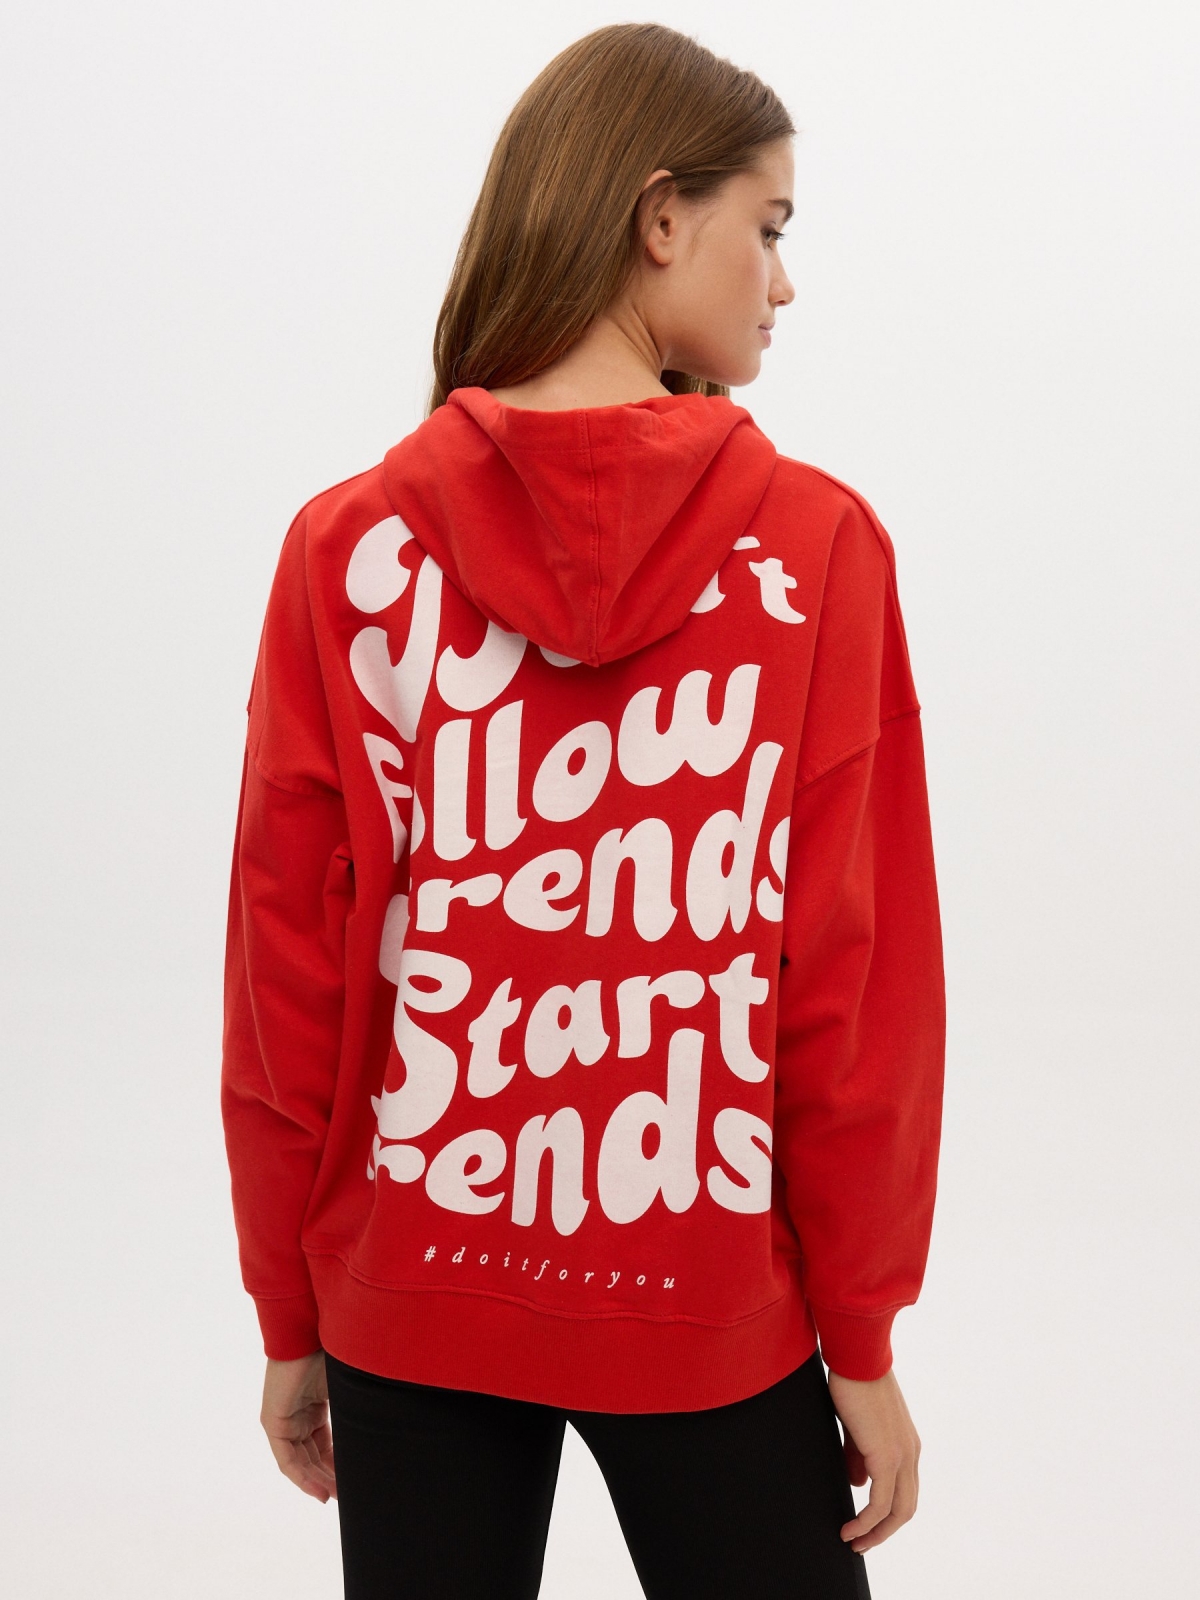 Don't Follow Trends Sweatshirt red middle back view